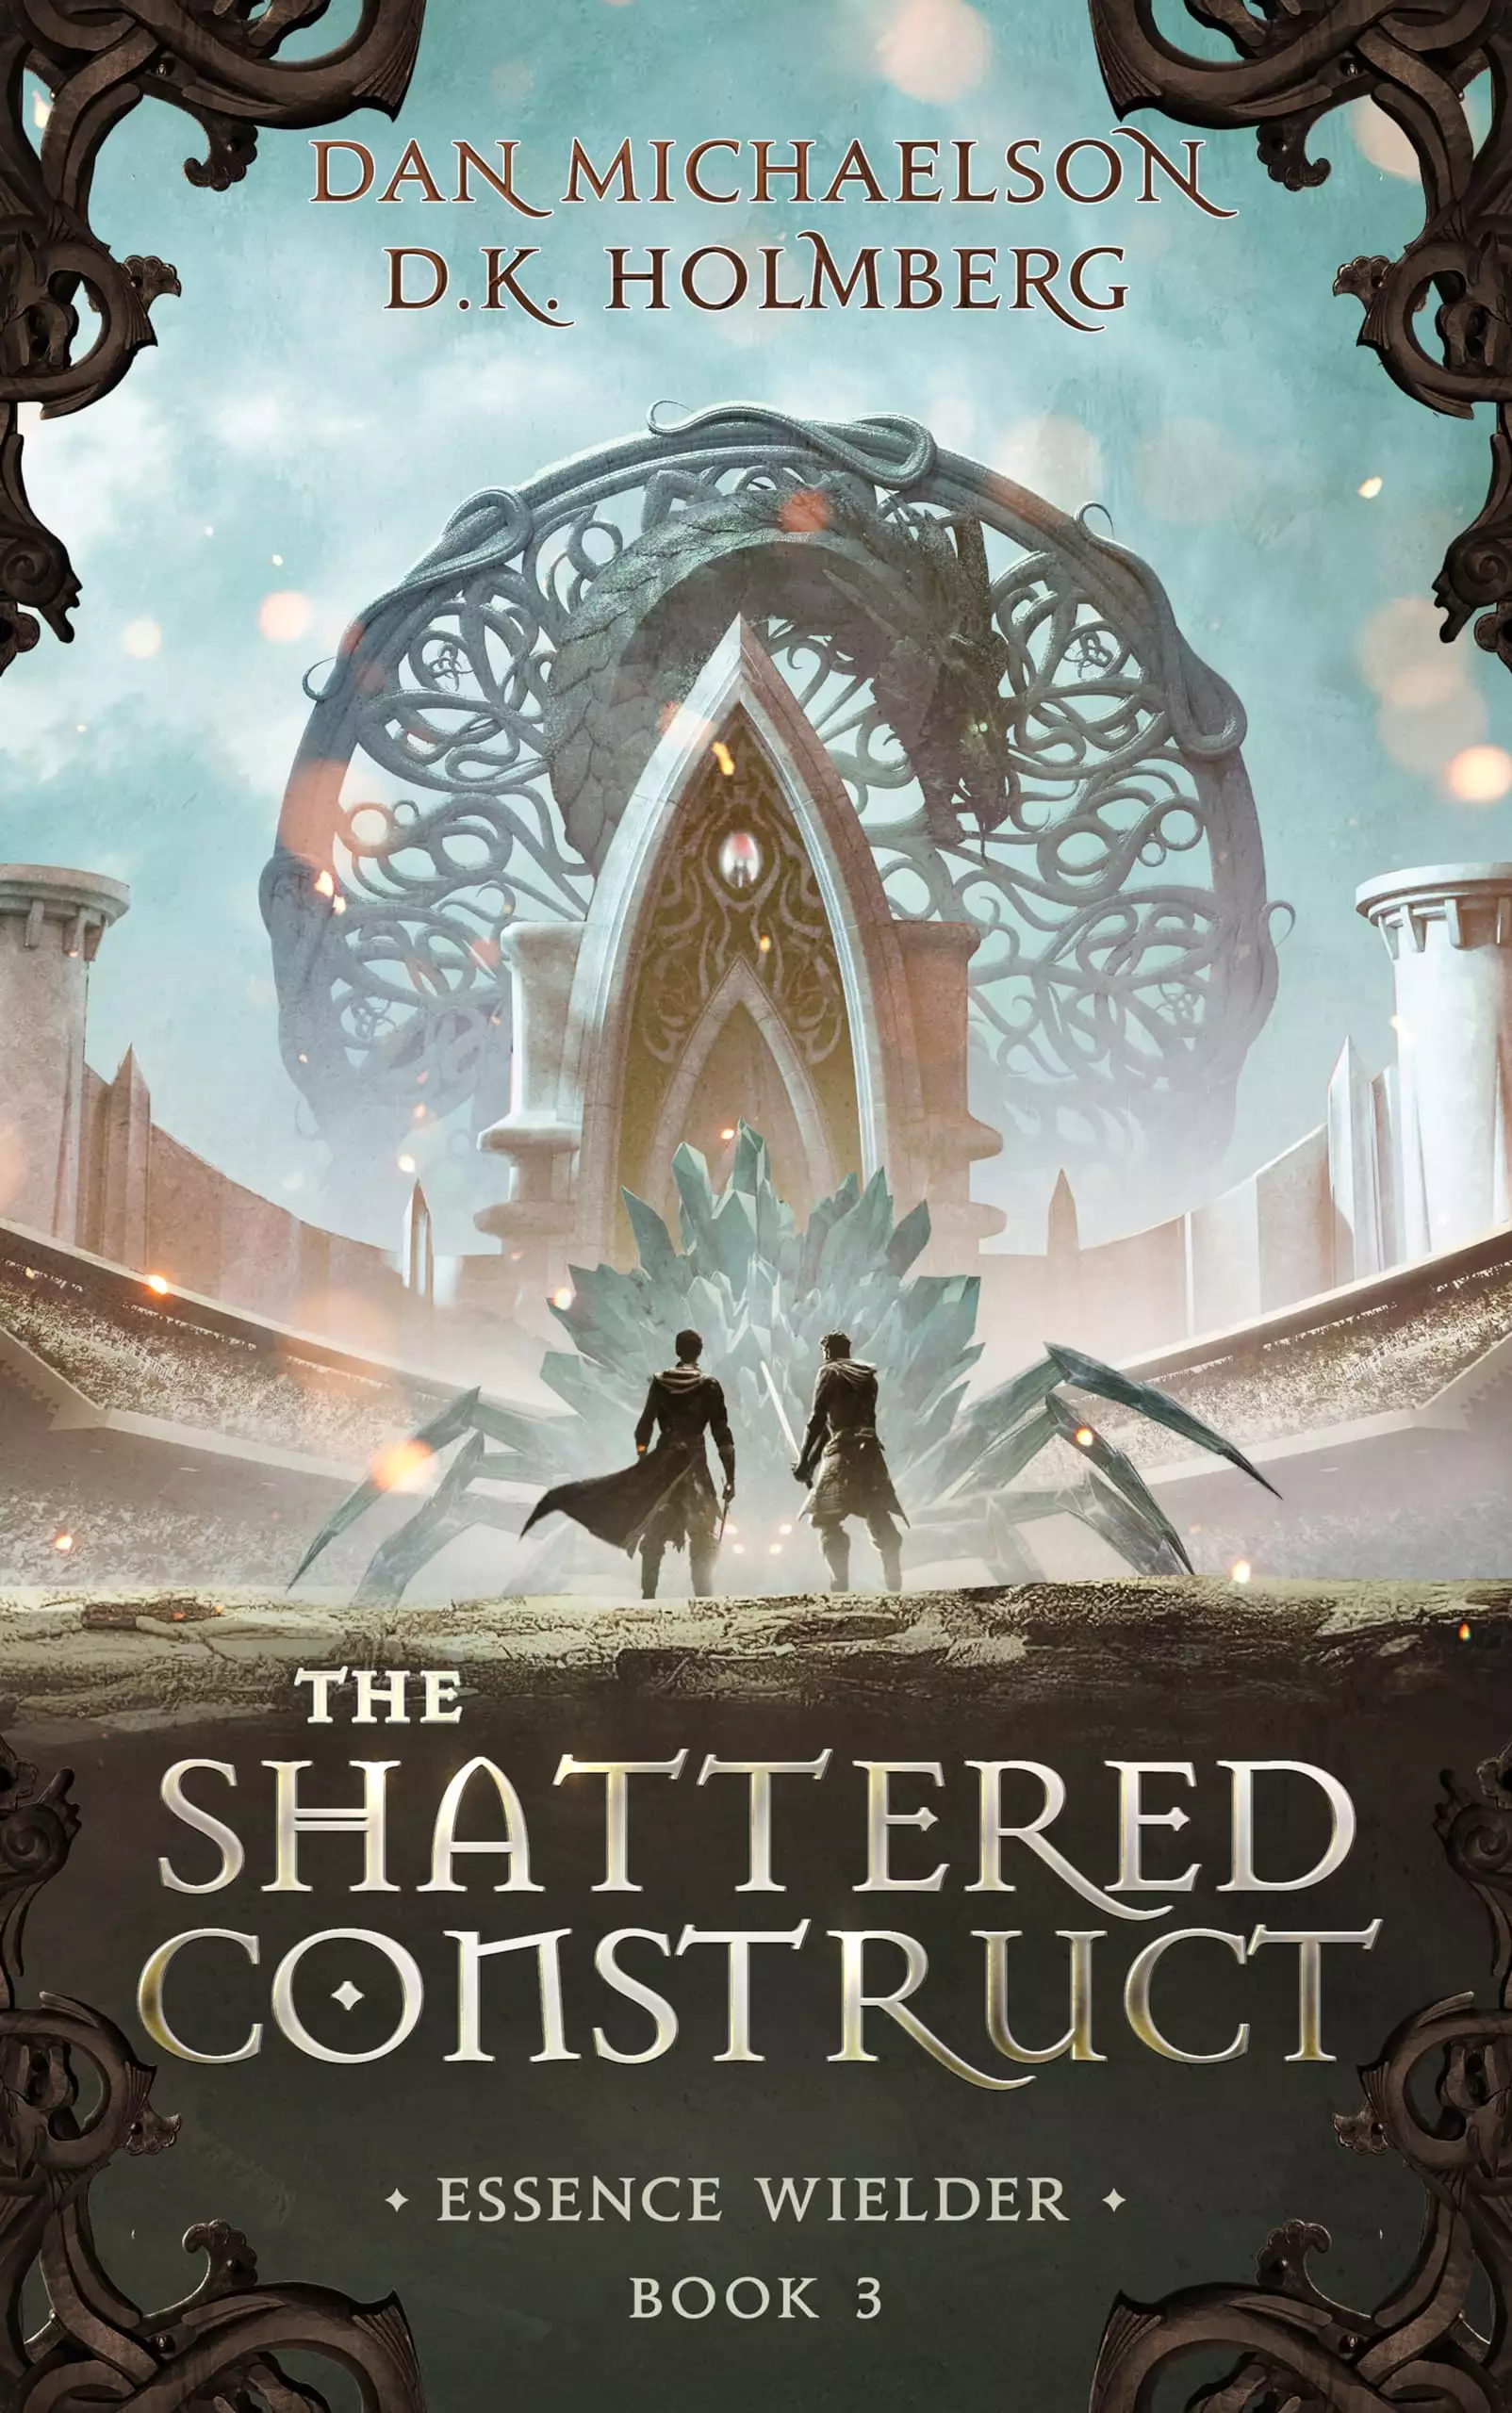 The Shattered Construct